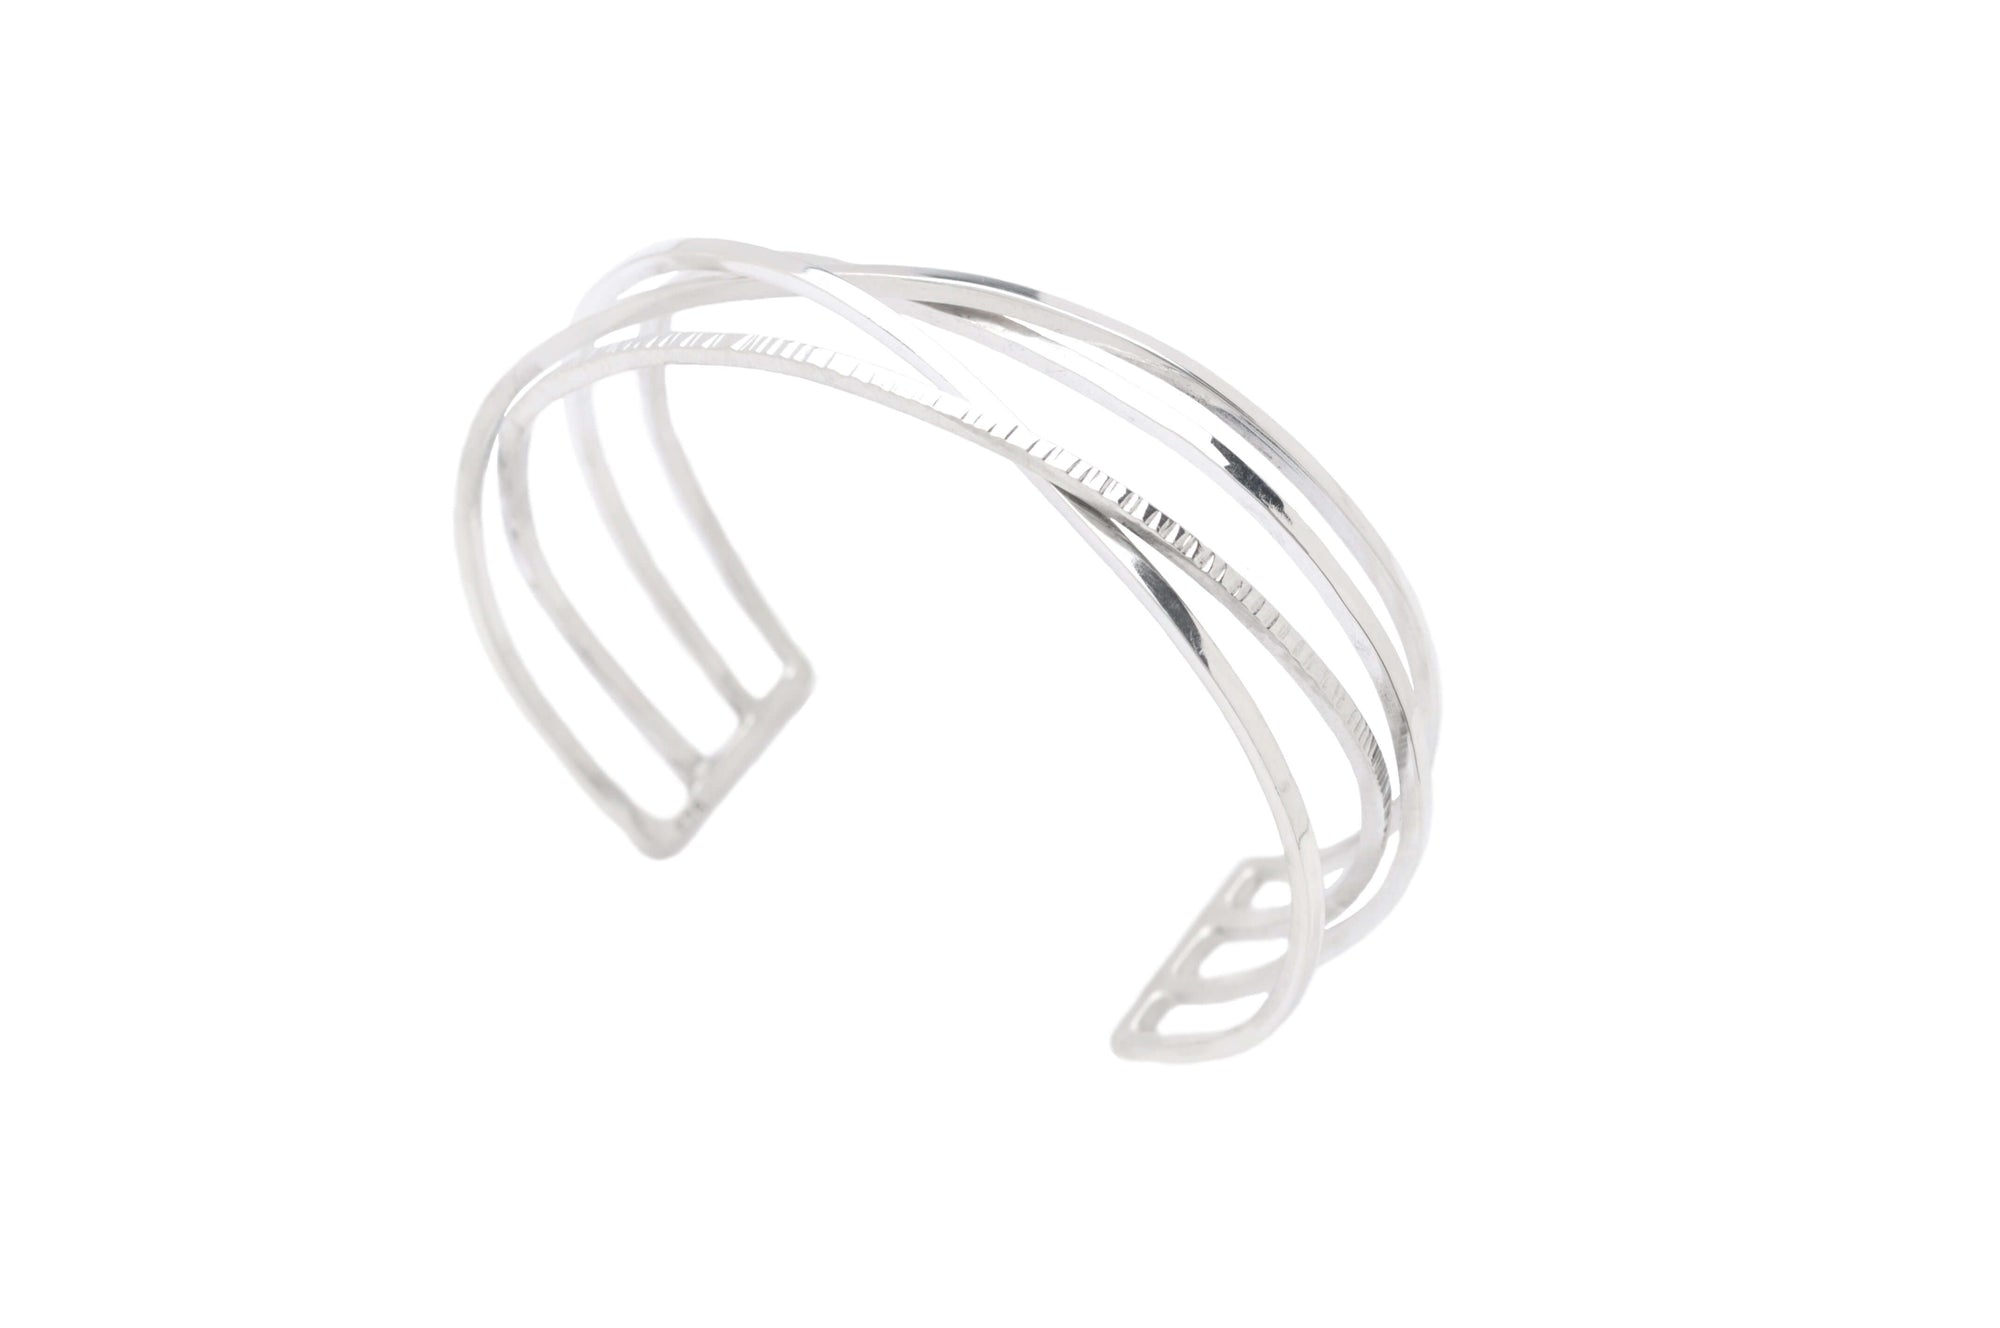 A four-band sterling silver woven bracelet